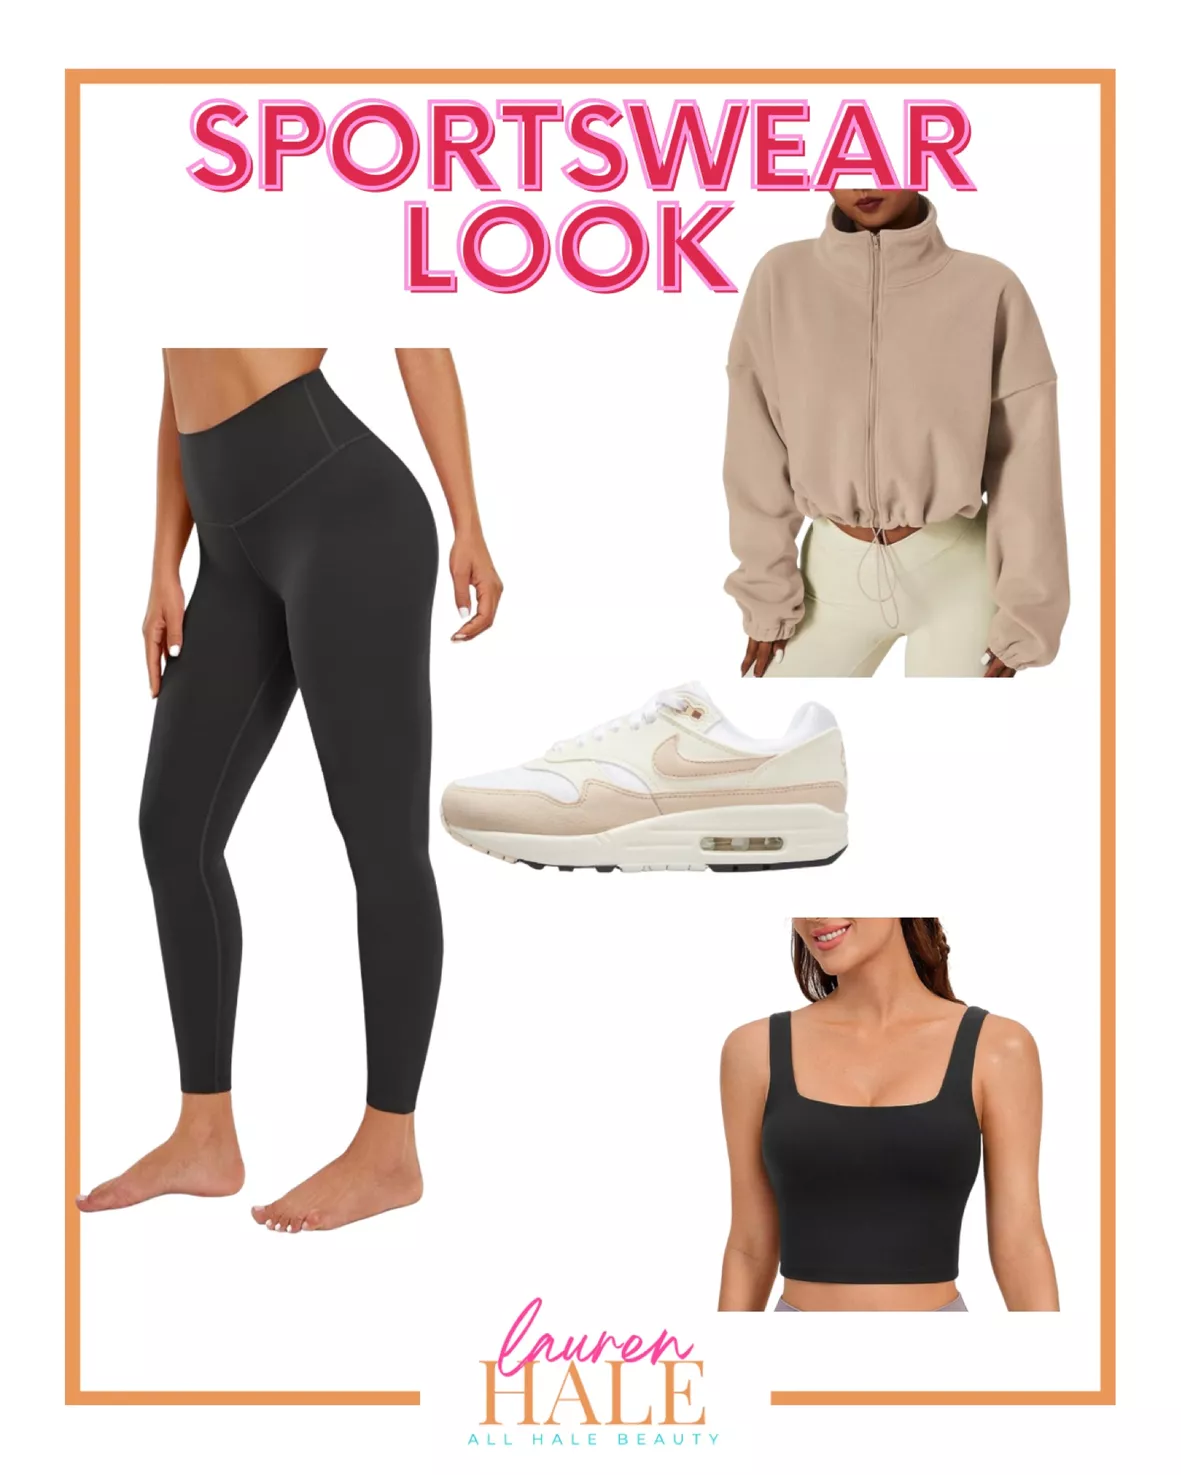 LULULEMON DUPES - WORKOUT LOOKS FOR LESS - VP of STYLE